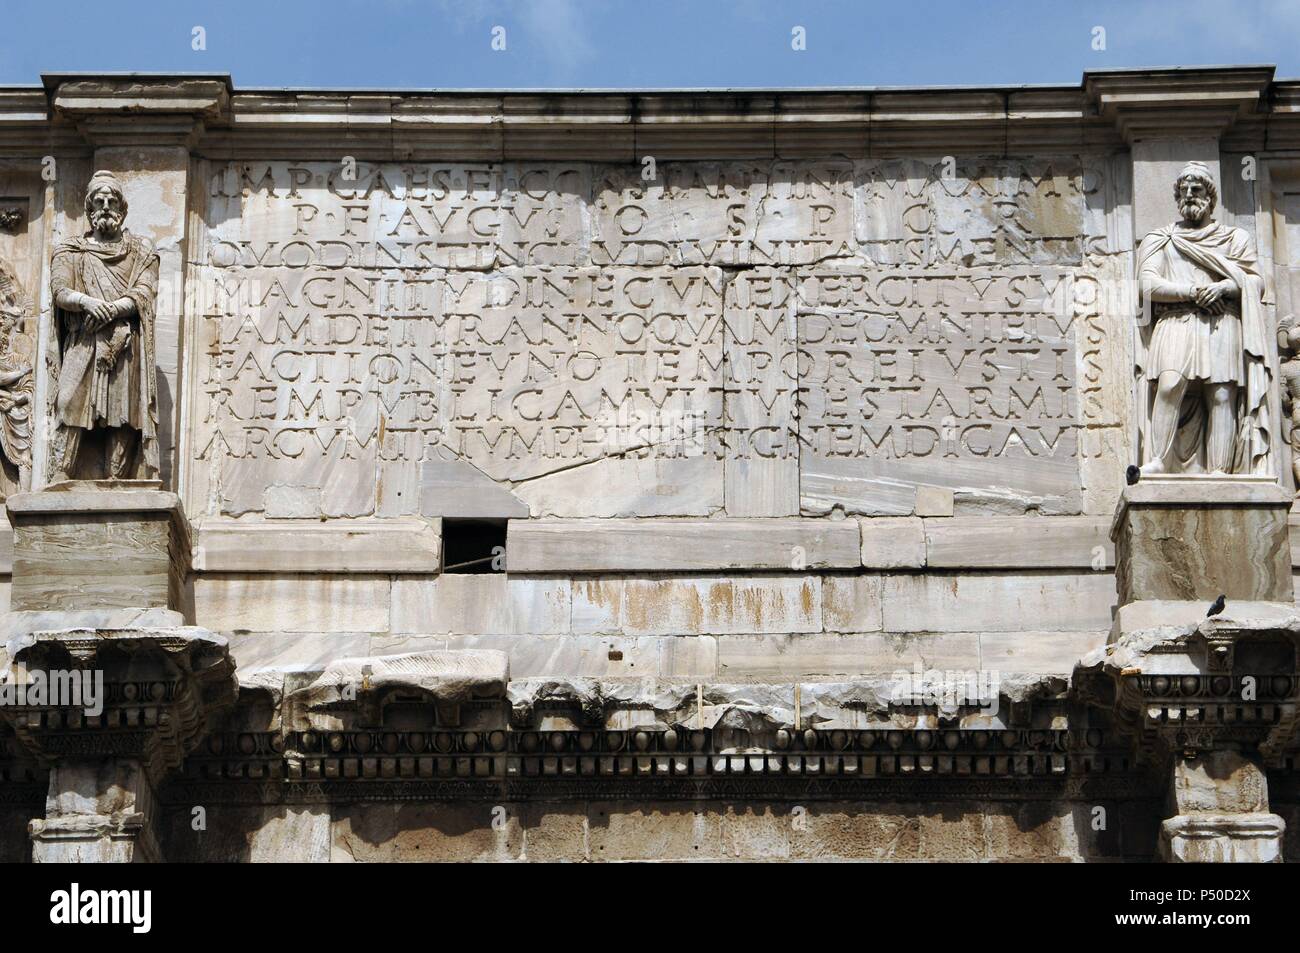 Roman Art. Arch of Constantine. Triumphal arch erected in the 4th century (315) by the Senate in honor of the Emperor Constantine after his victory over Maxentius at the Battle of Milvian Bridge (312). Latin inscription. Rome. Italy. Stock Photo